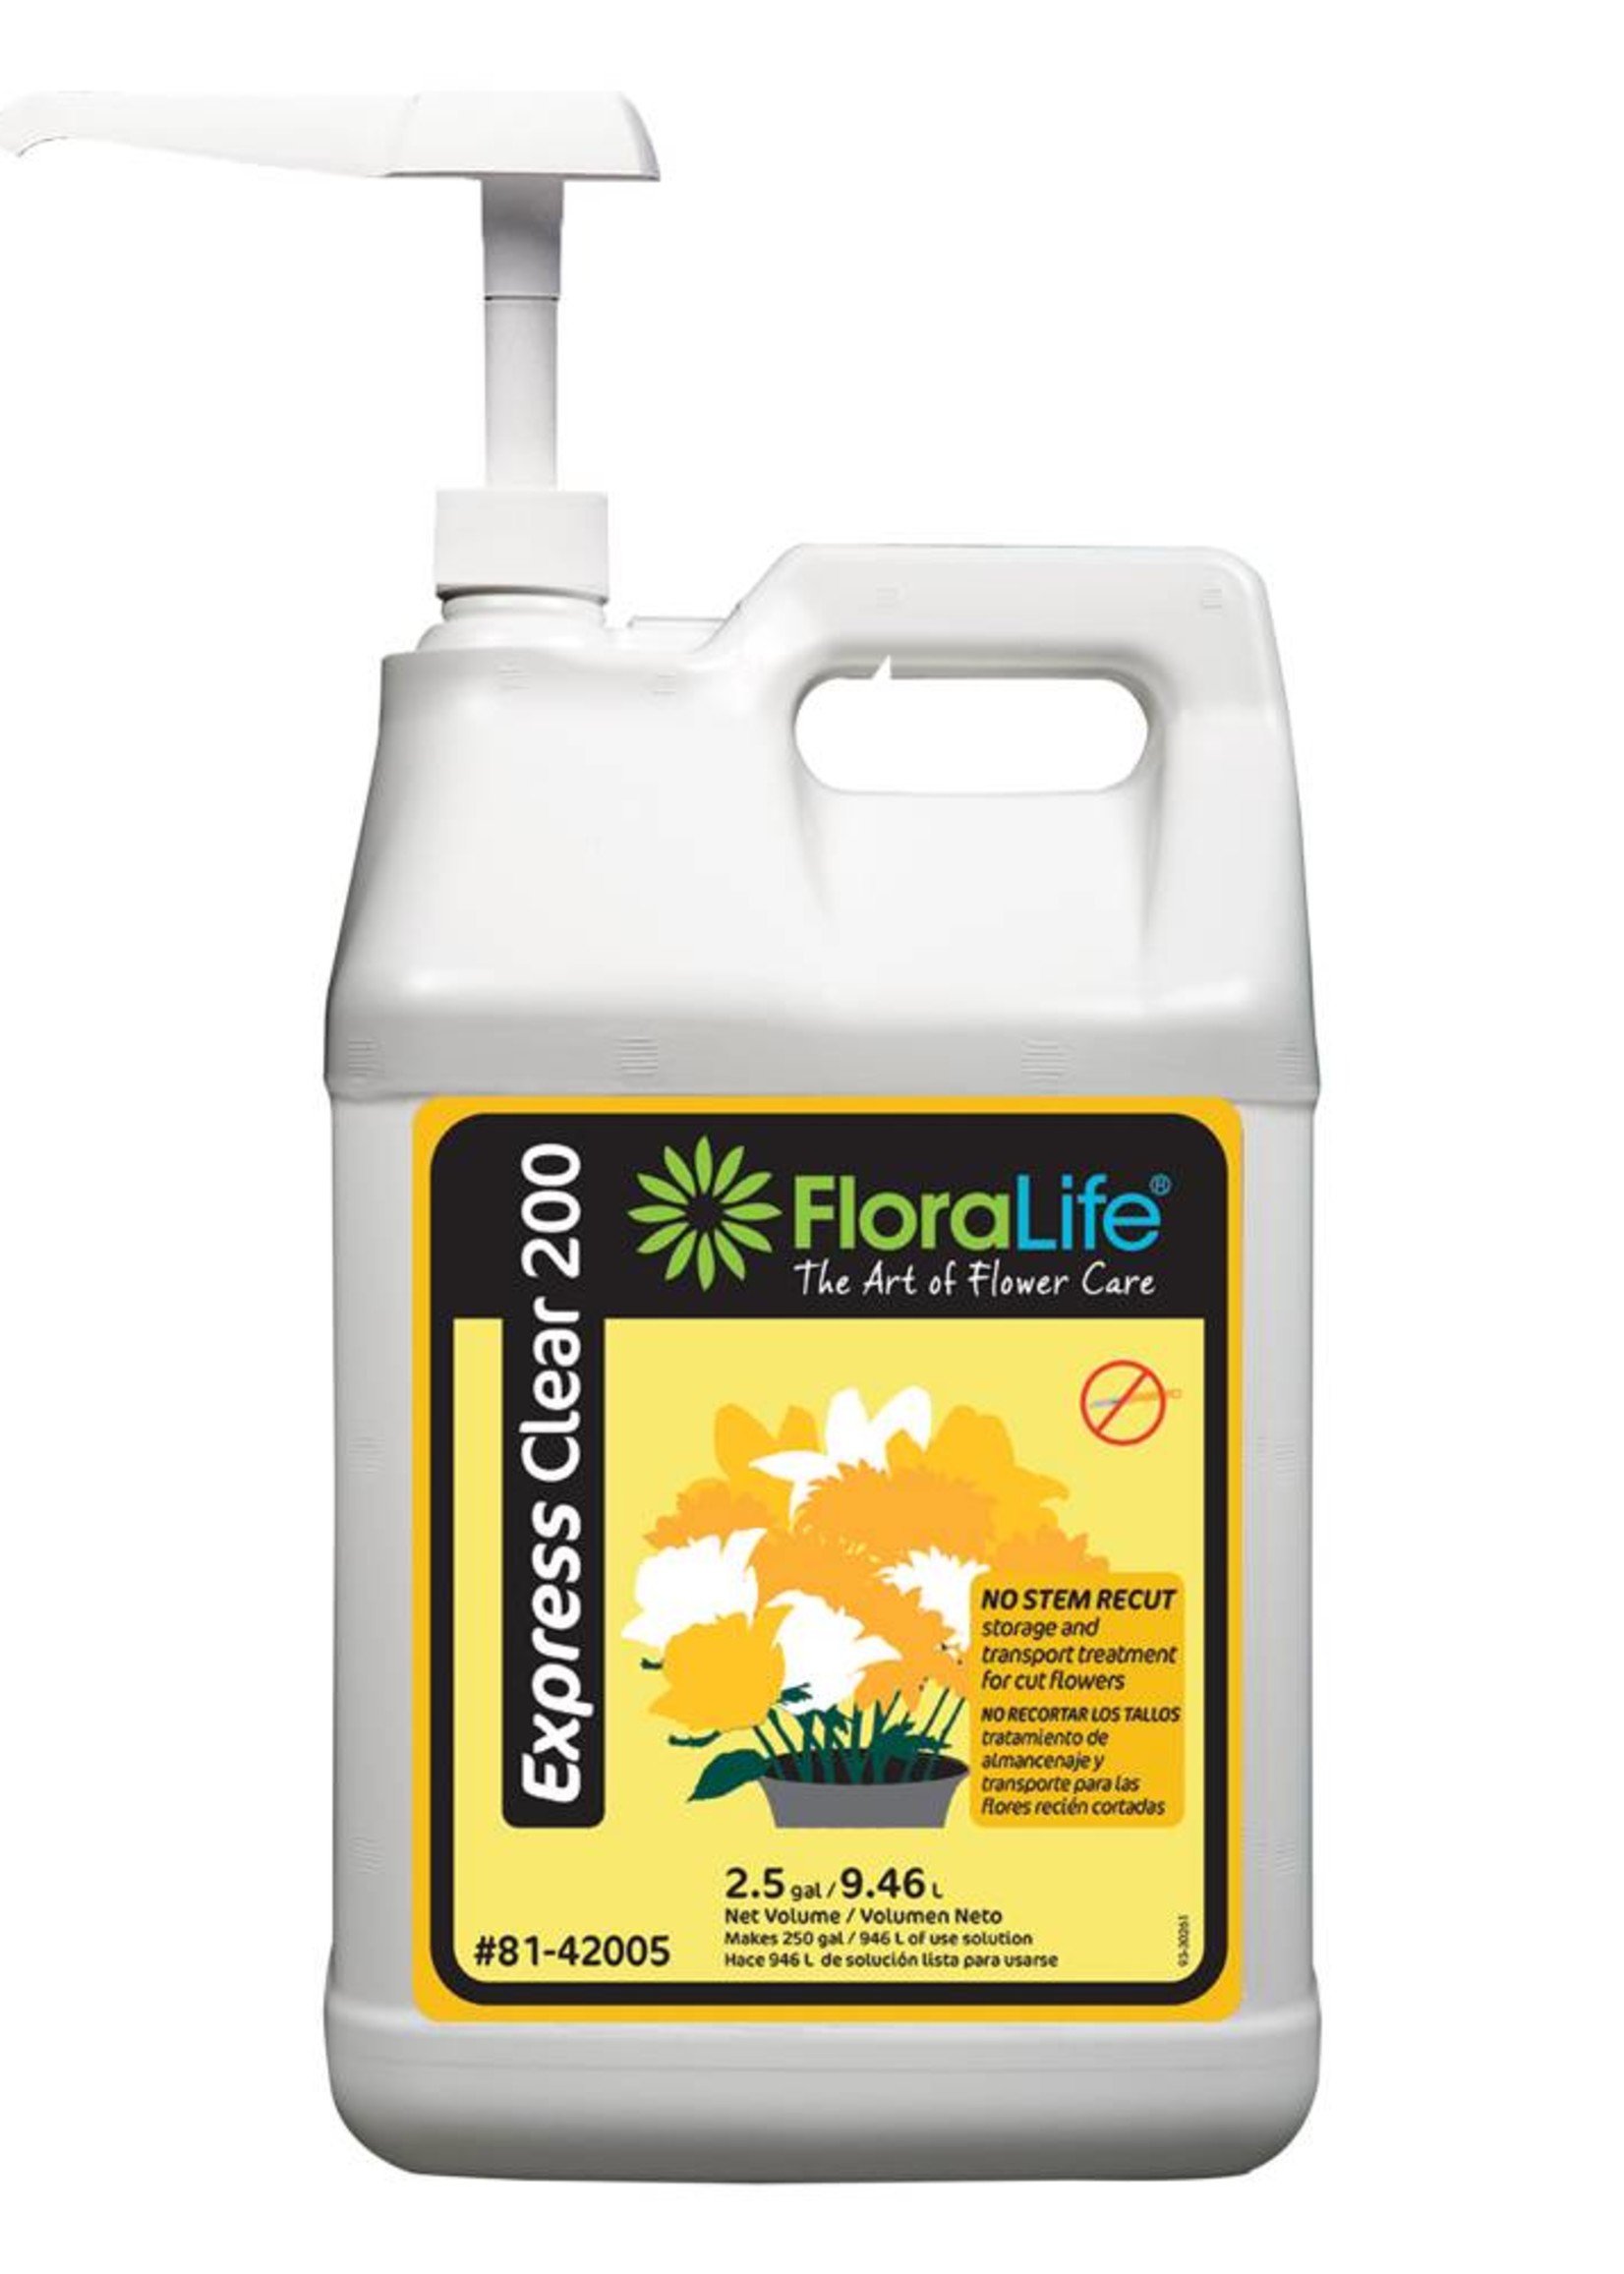 Floralife® Express Clear 200 storage and transport